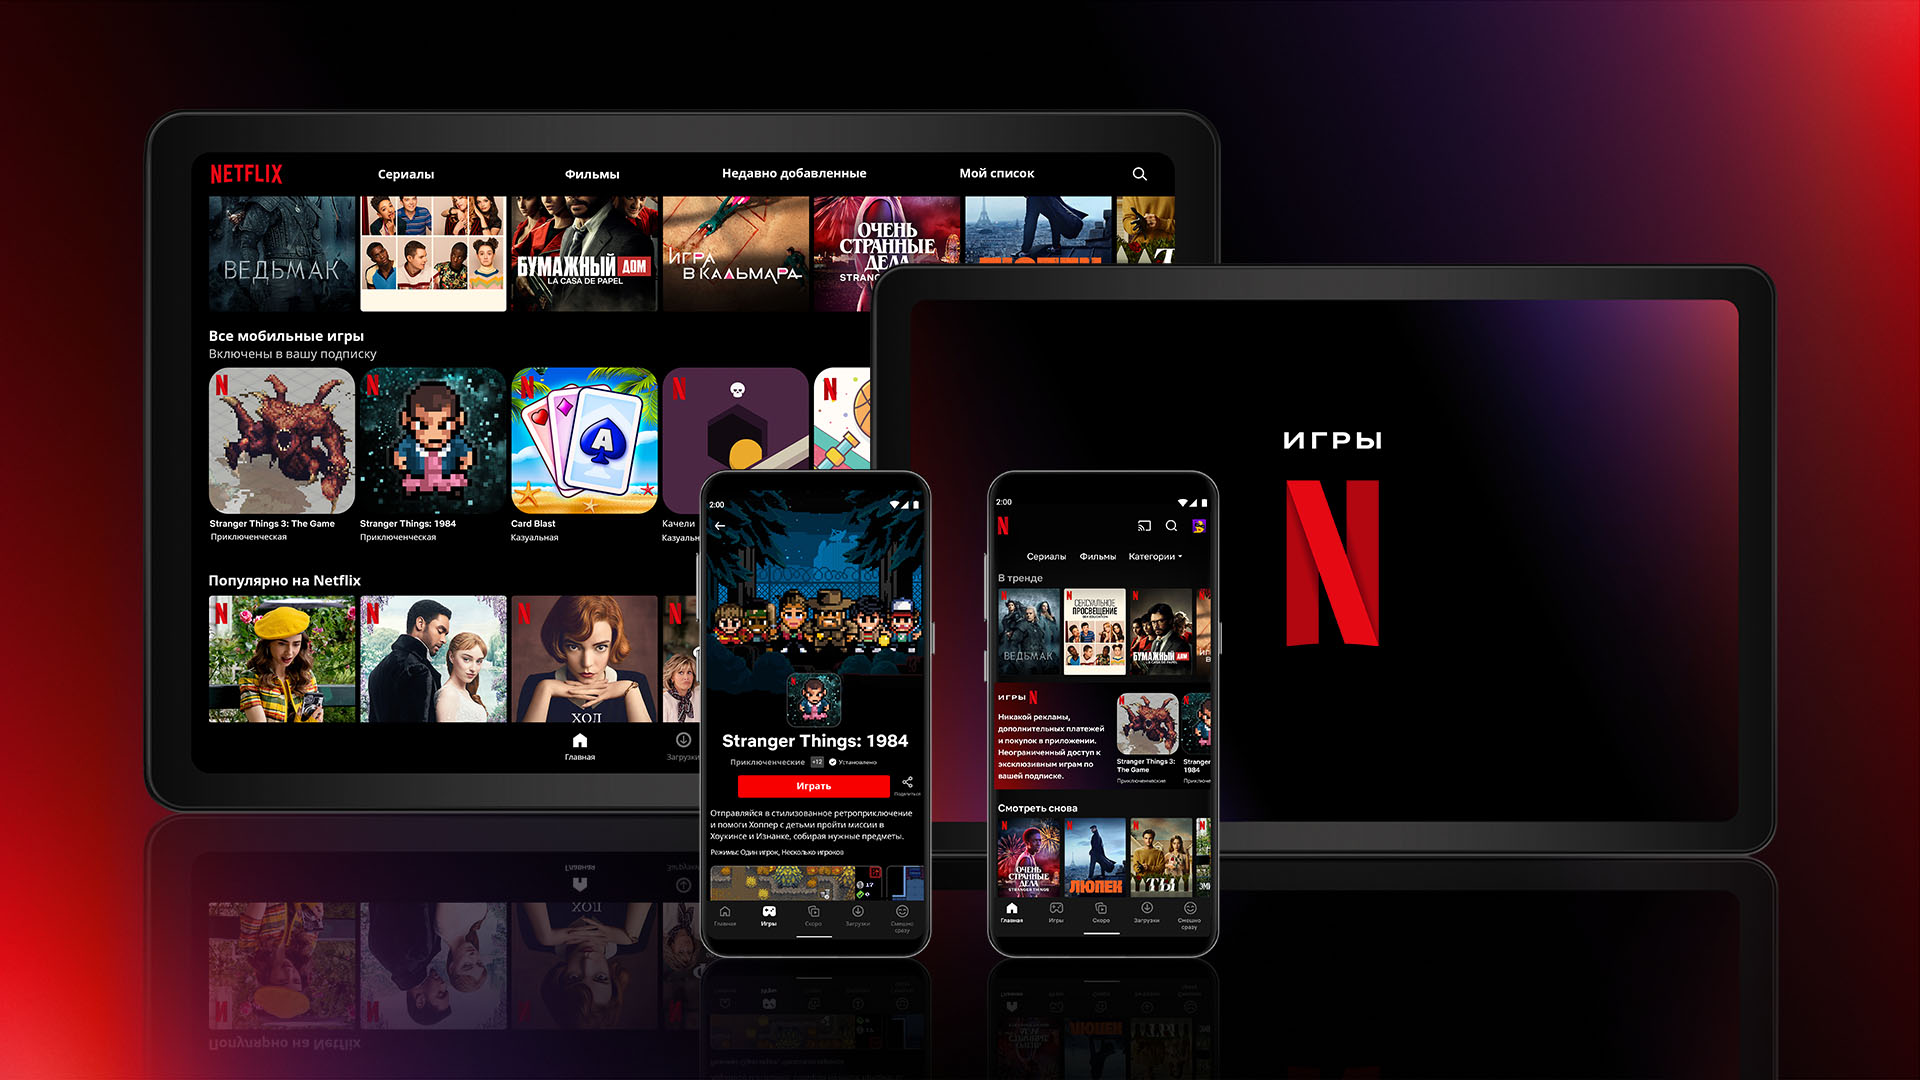 About Netflix Let The Games Begin A New Way To Experience Entertainment On Mobile